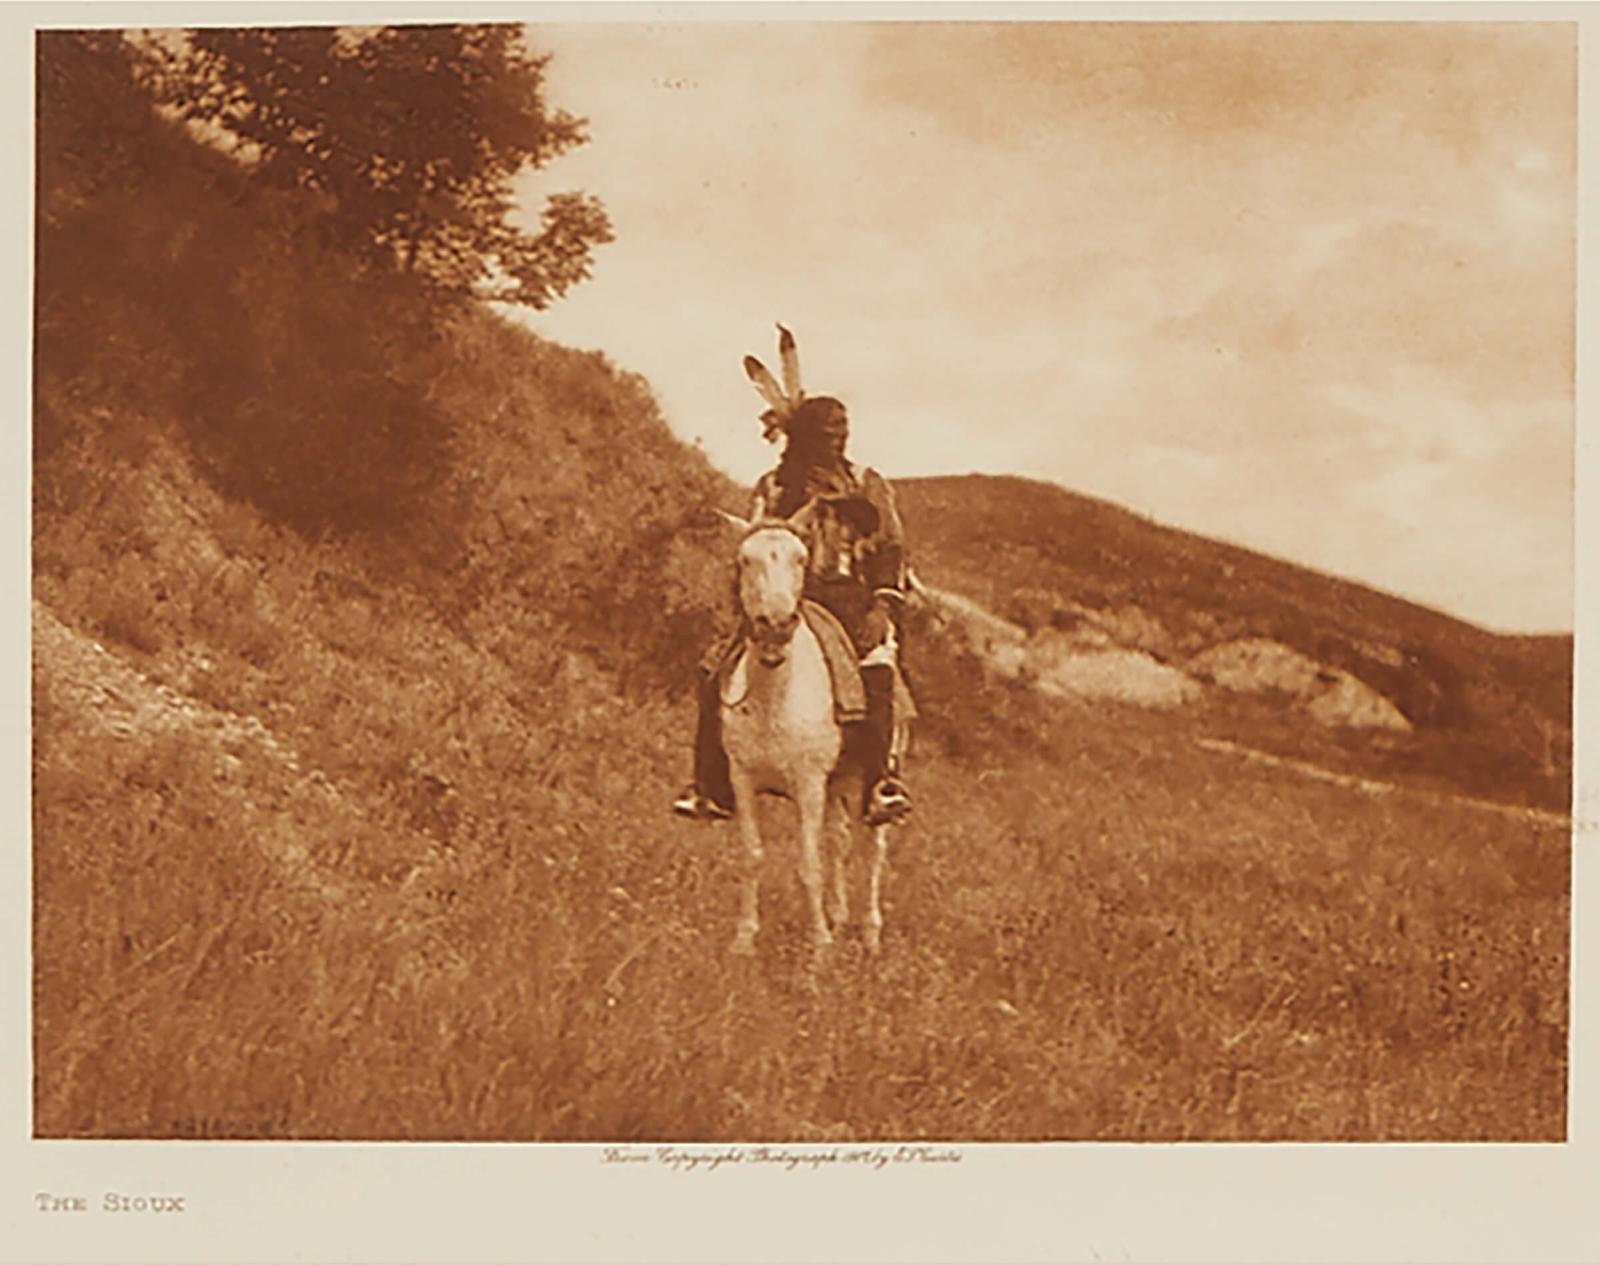 Edward Sherrif Curtis (1868-1952) - The Sioux; The Lookout - Apsaroke; Assiniboin Bowman; The Ford - Apache